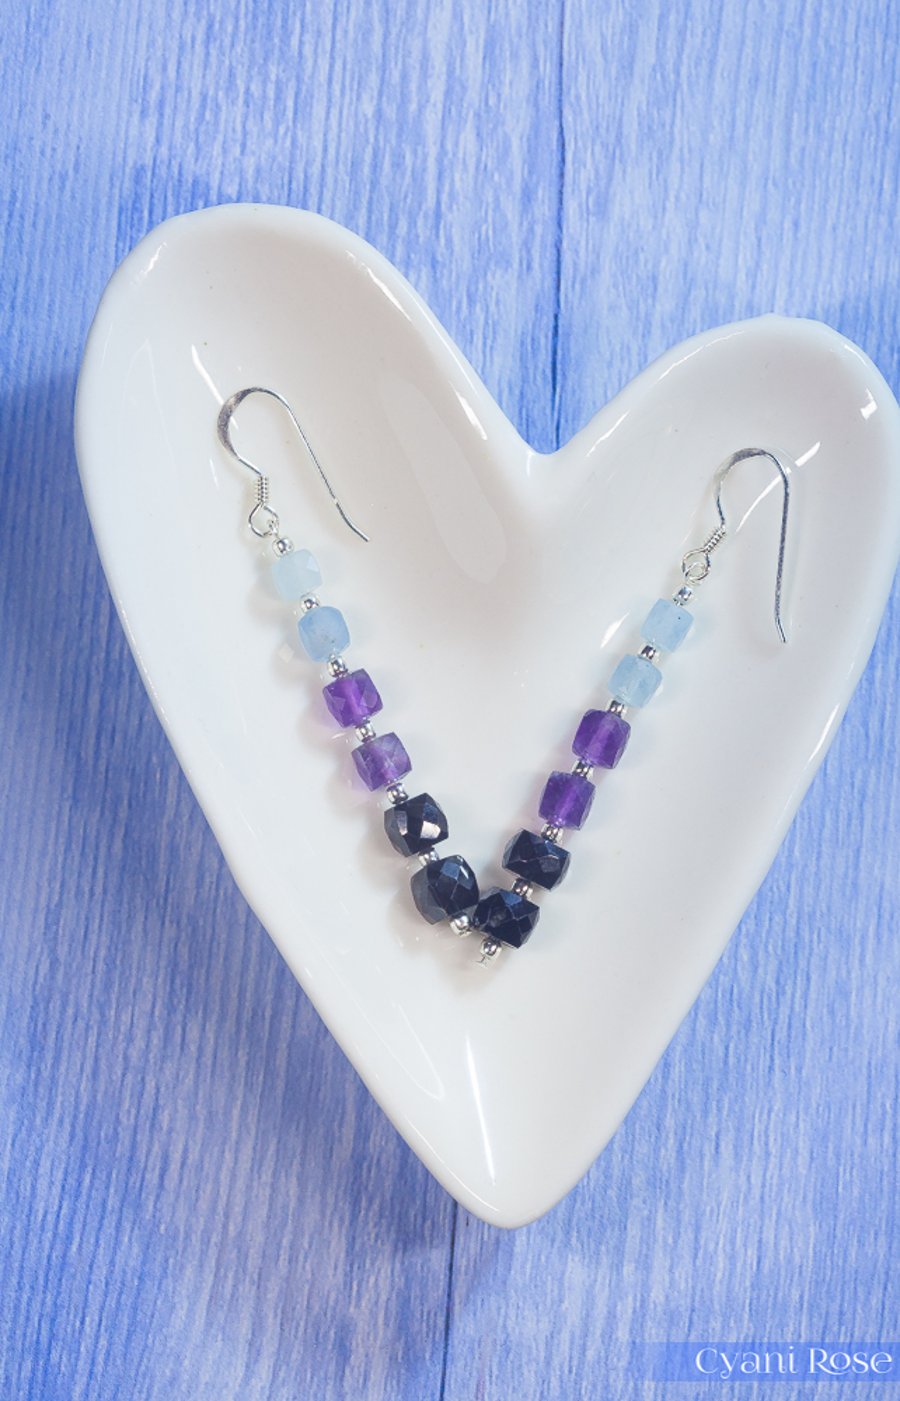 Drop earrings in Aquamarine, Amethyst, Black Spinel and Sterling Silver